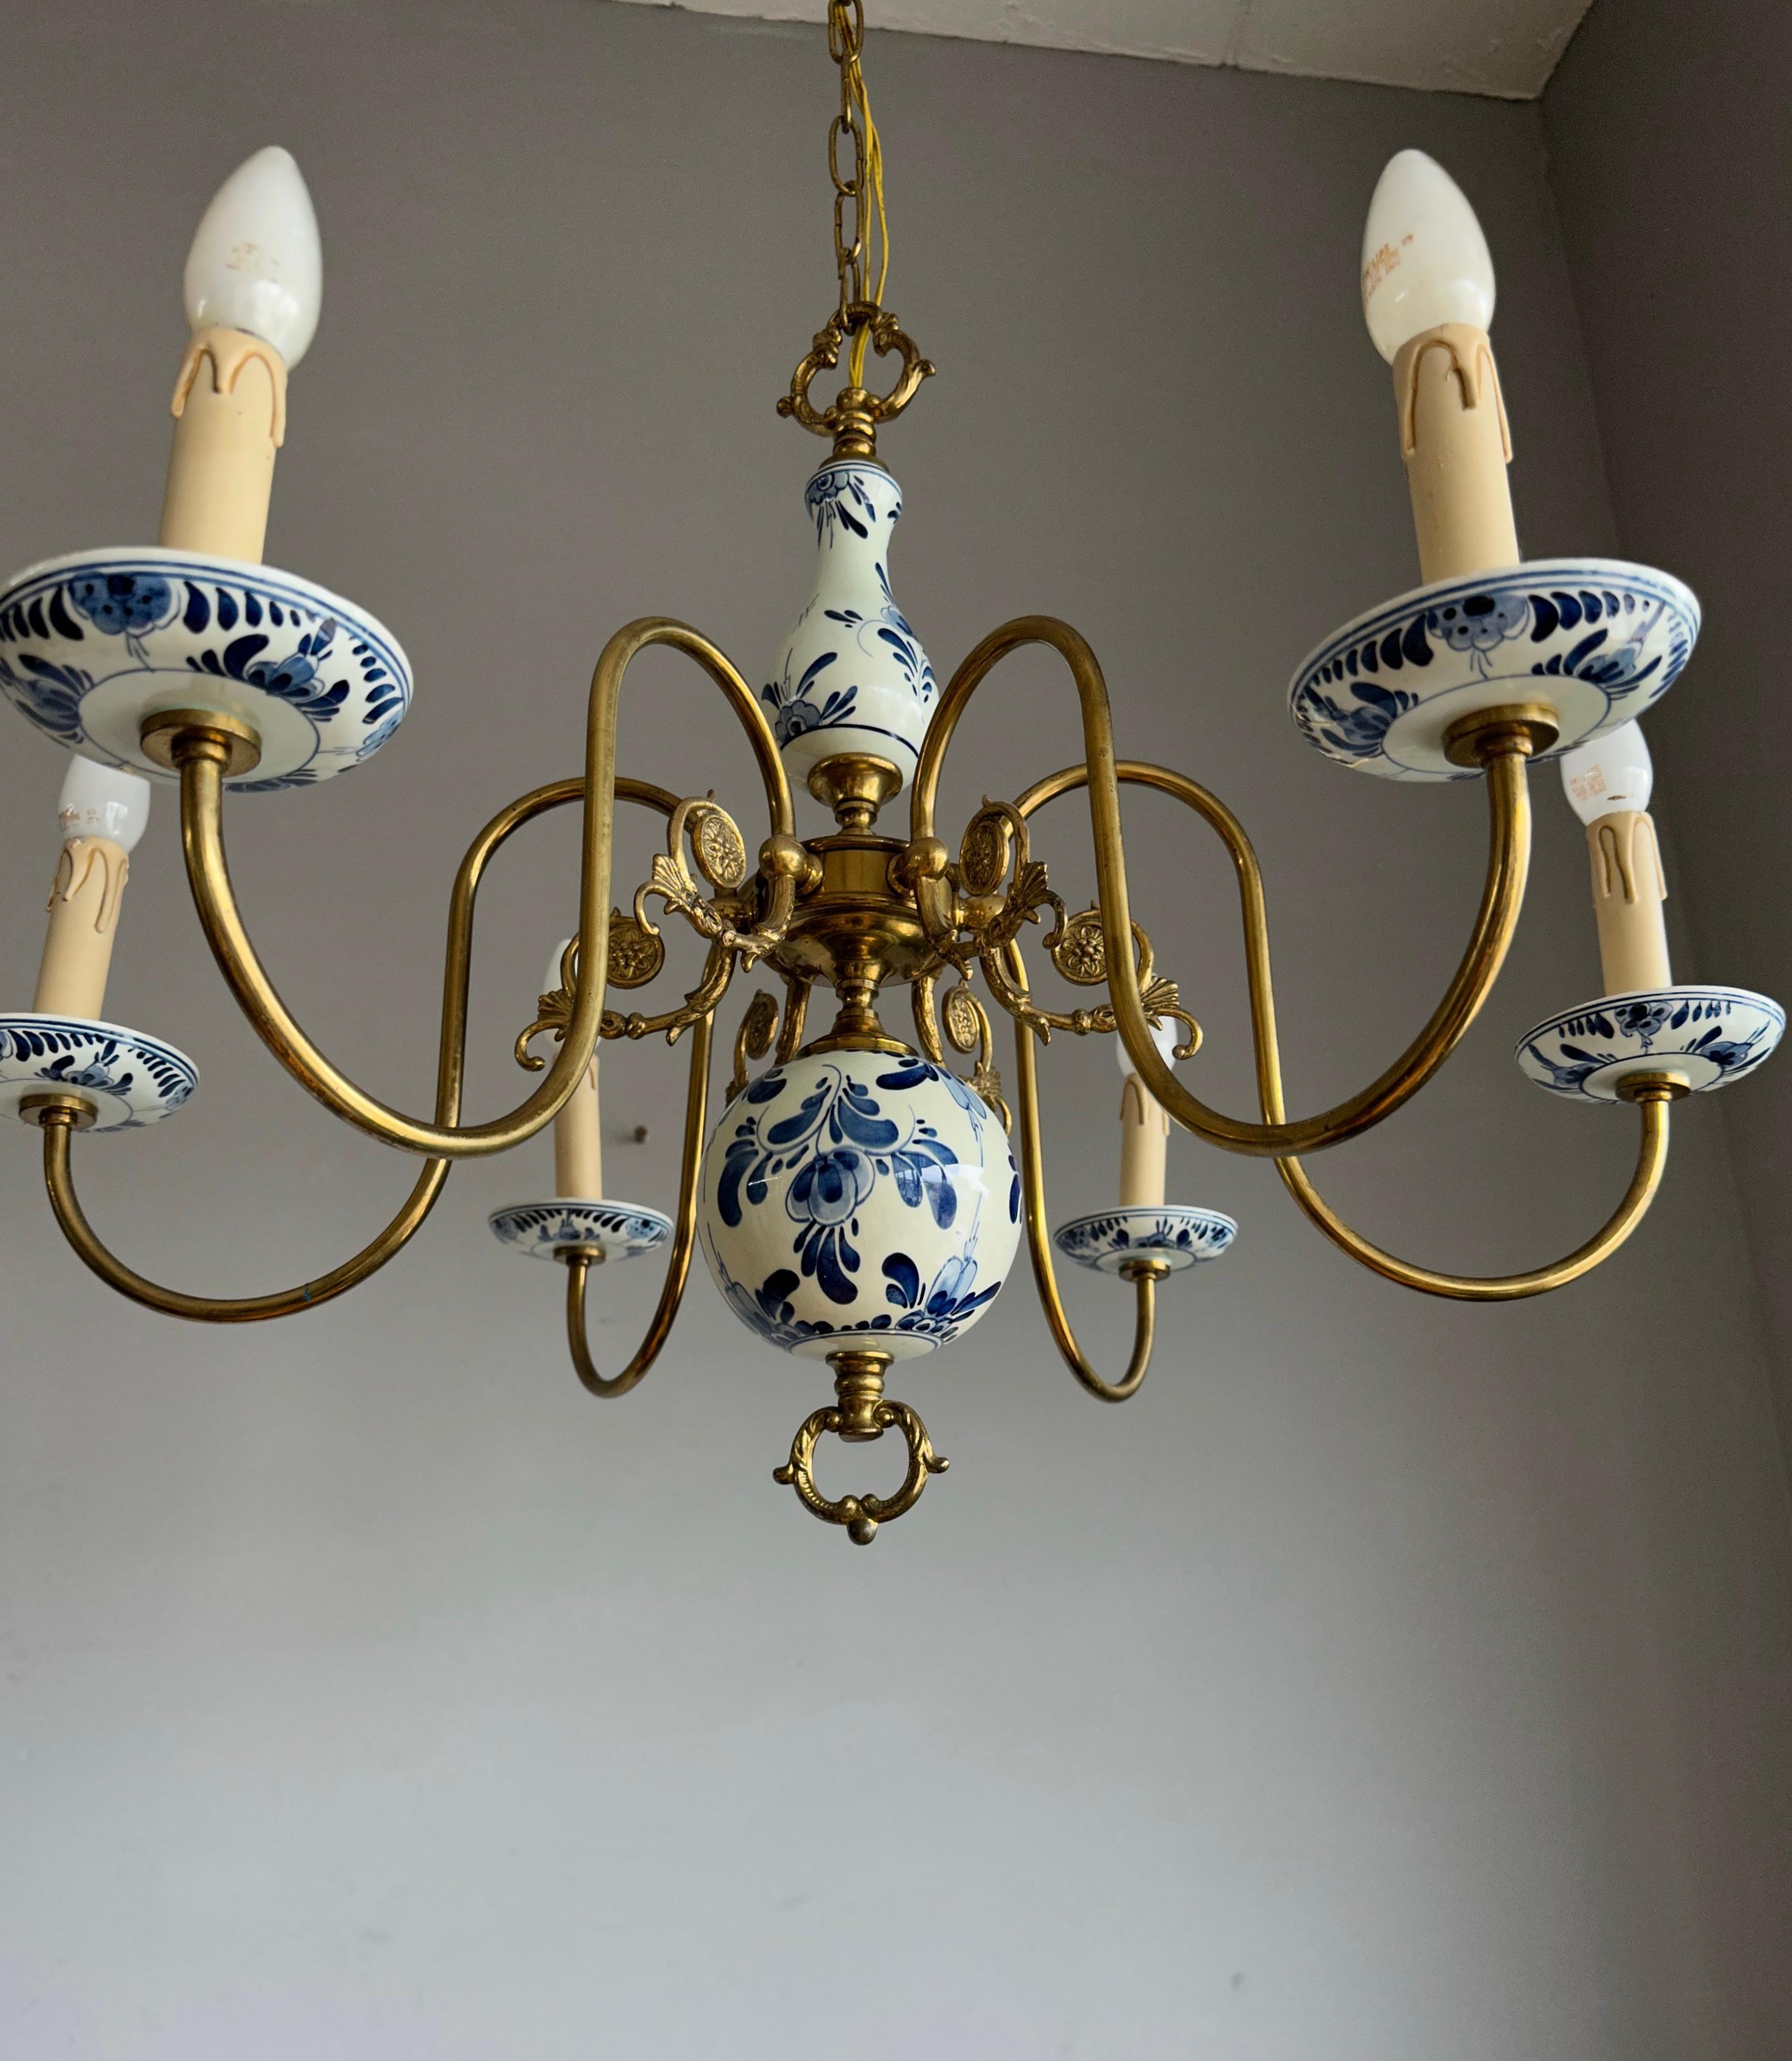 1940s Dutch Brass and Porcelain Hand Painted Delft Blue and White Chandelier For Sale 6